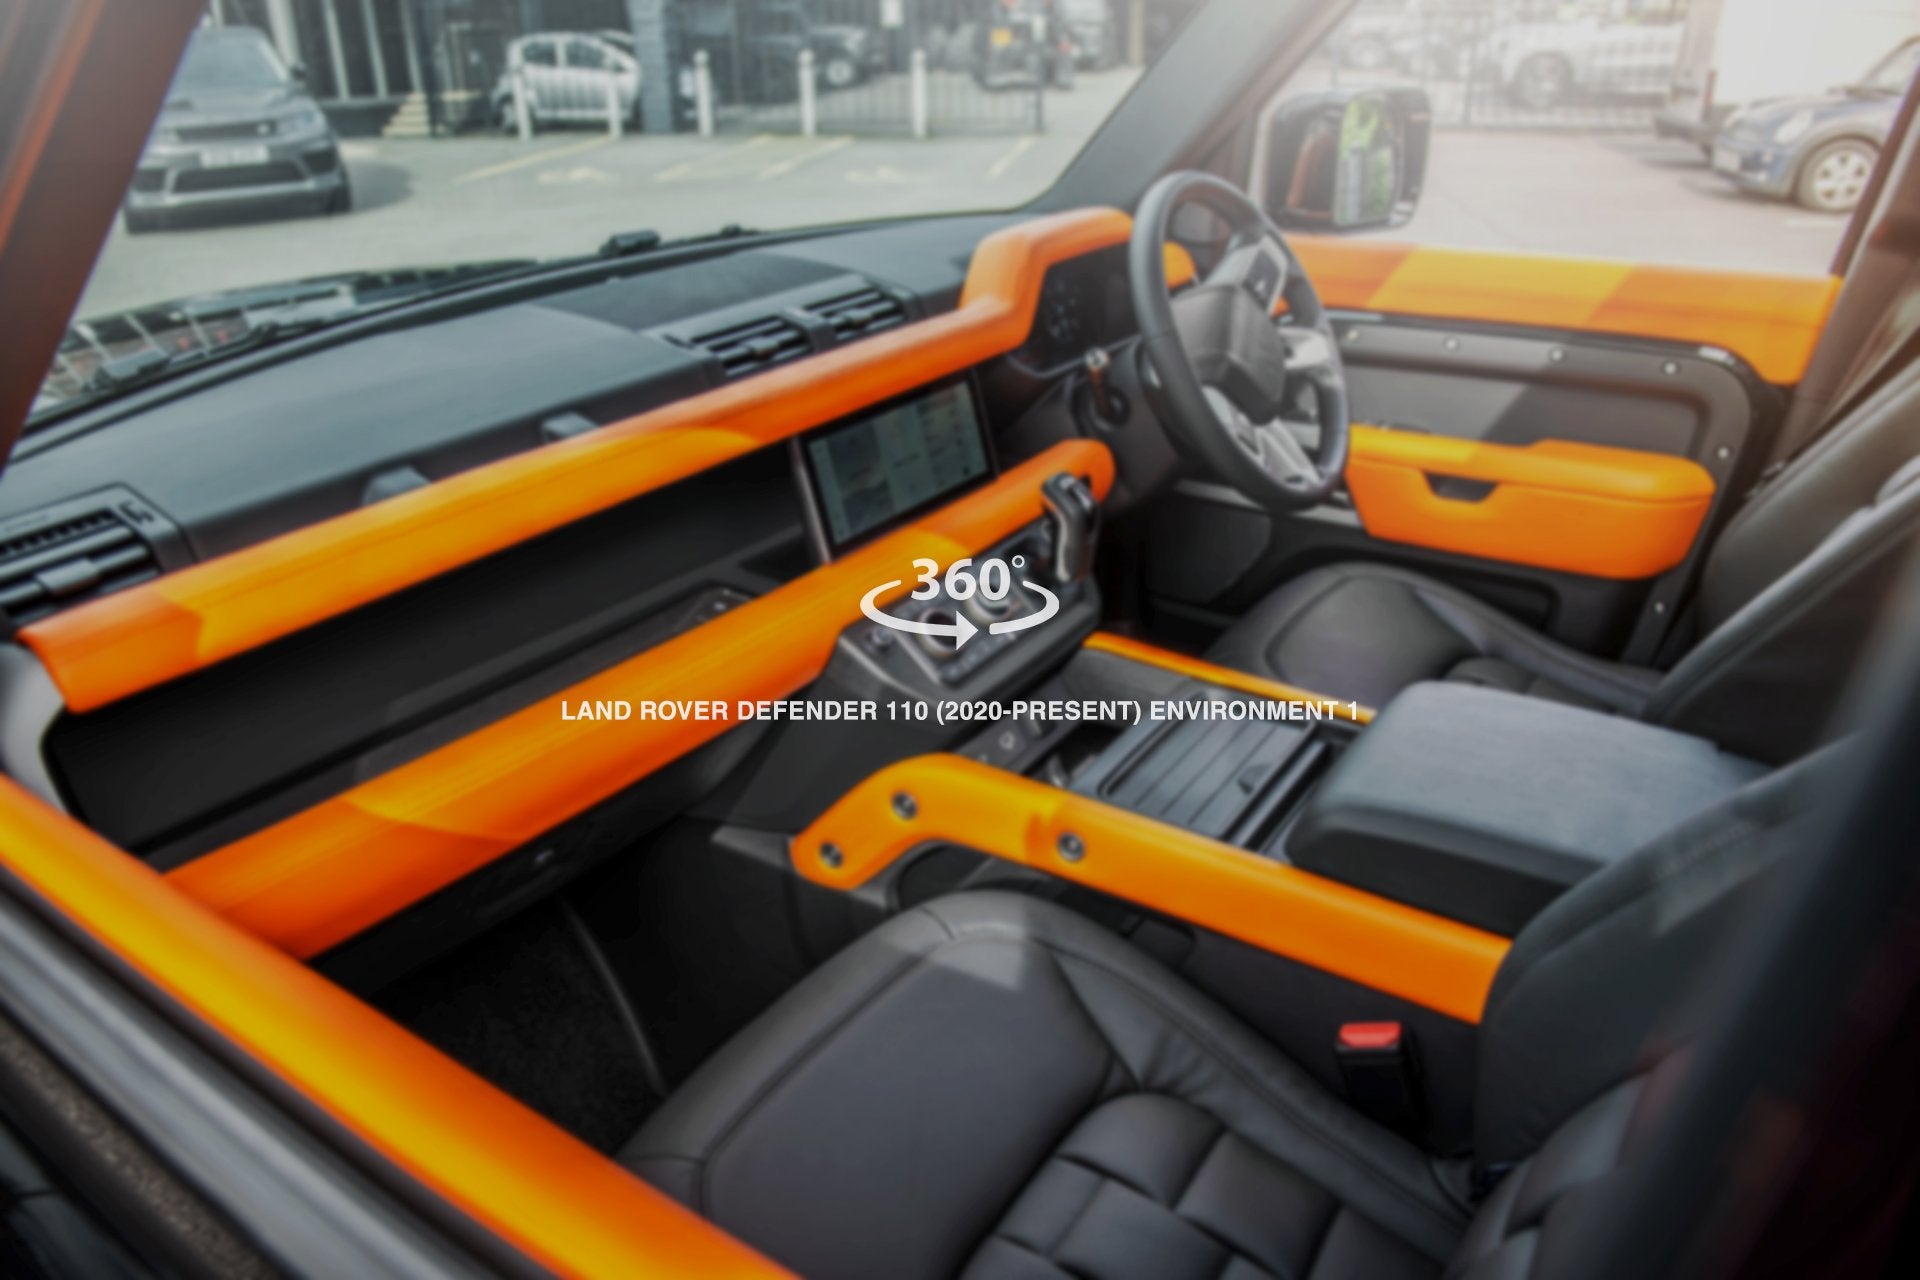 Land Rover Defender 110 (2020-Present) Environment 1: Upper, Middle and Lower Interior 360° Tour